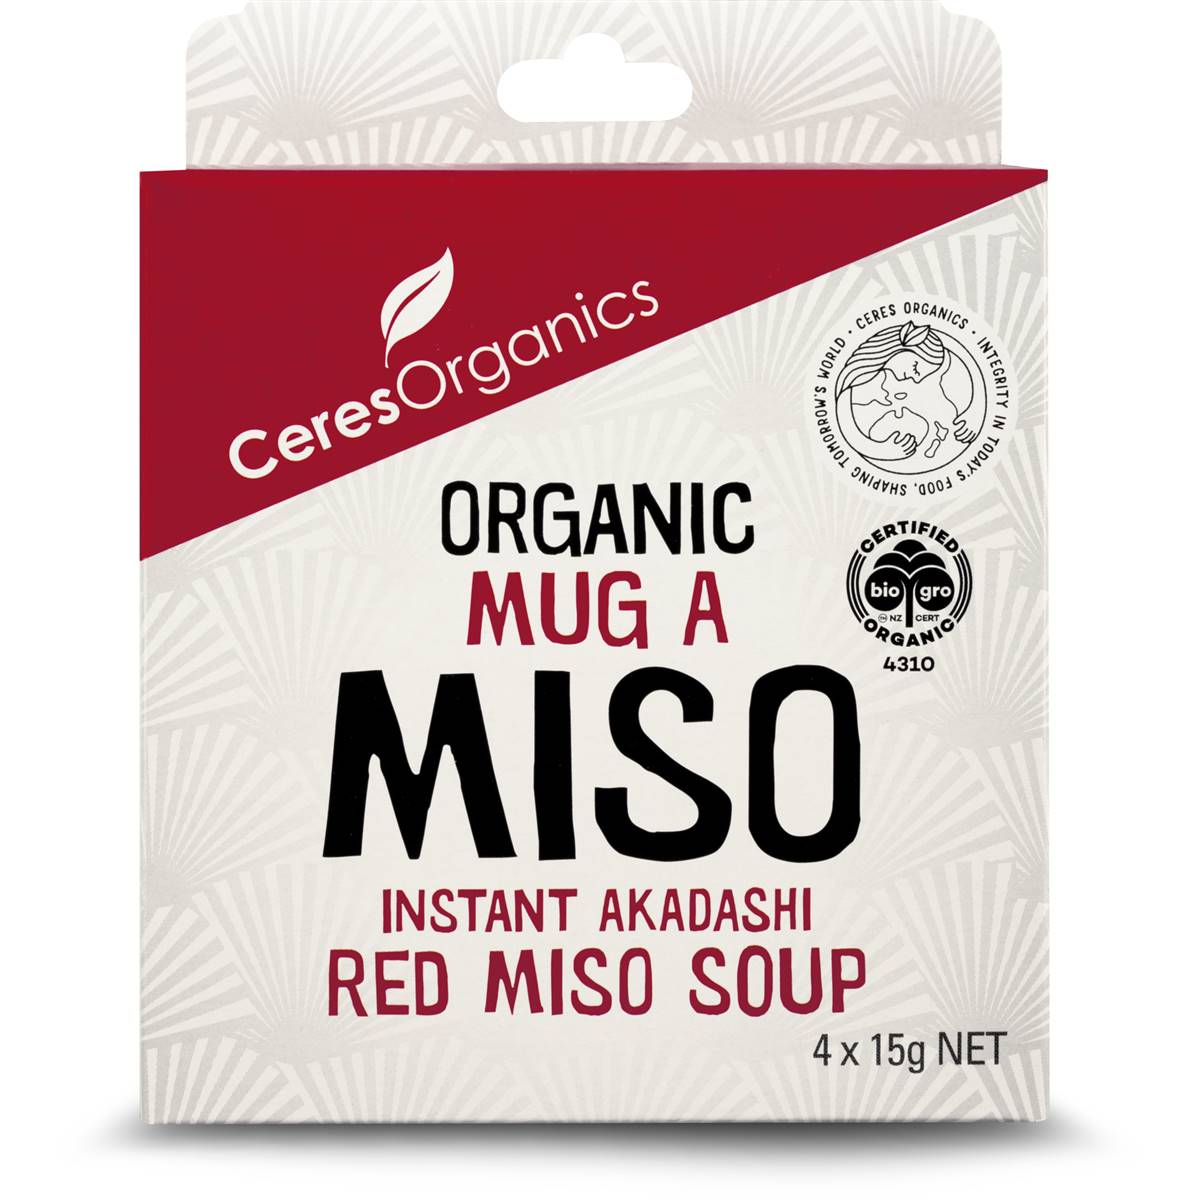 Calories in Ceres Organic Mug A Miso Instant Akadashi Red Miso Soup